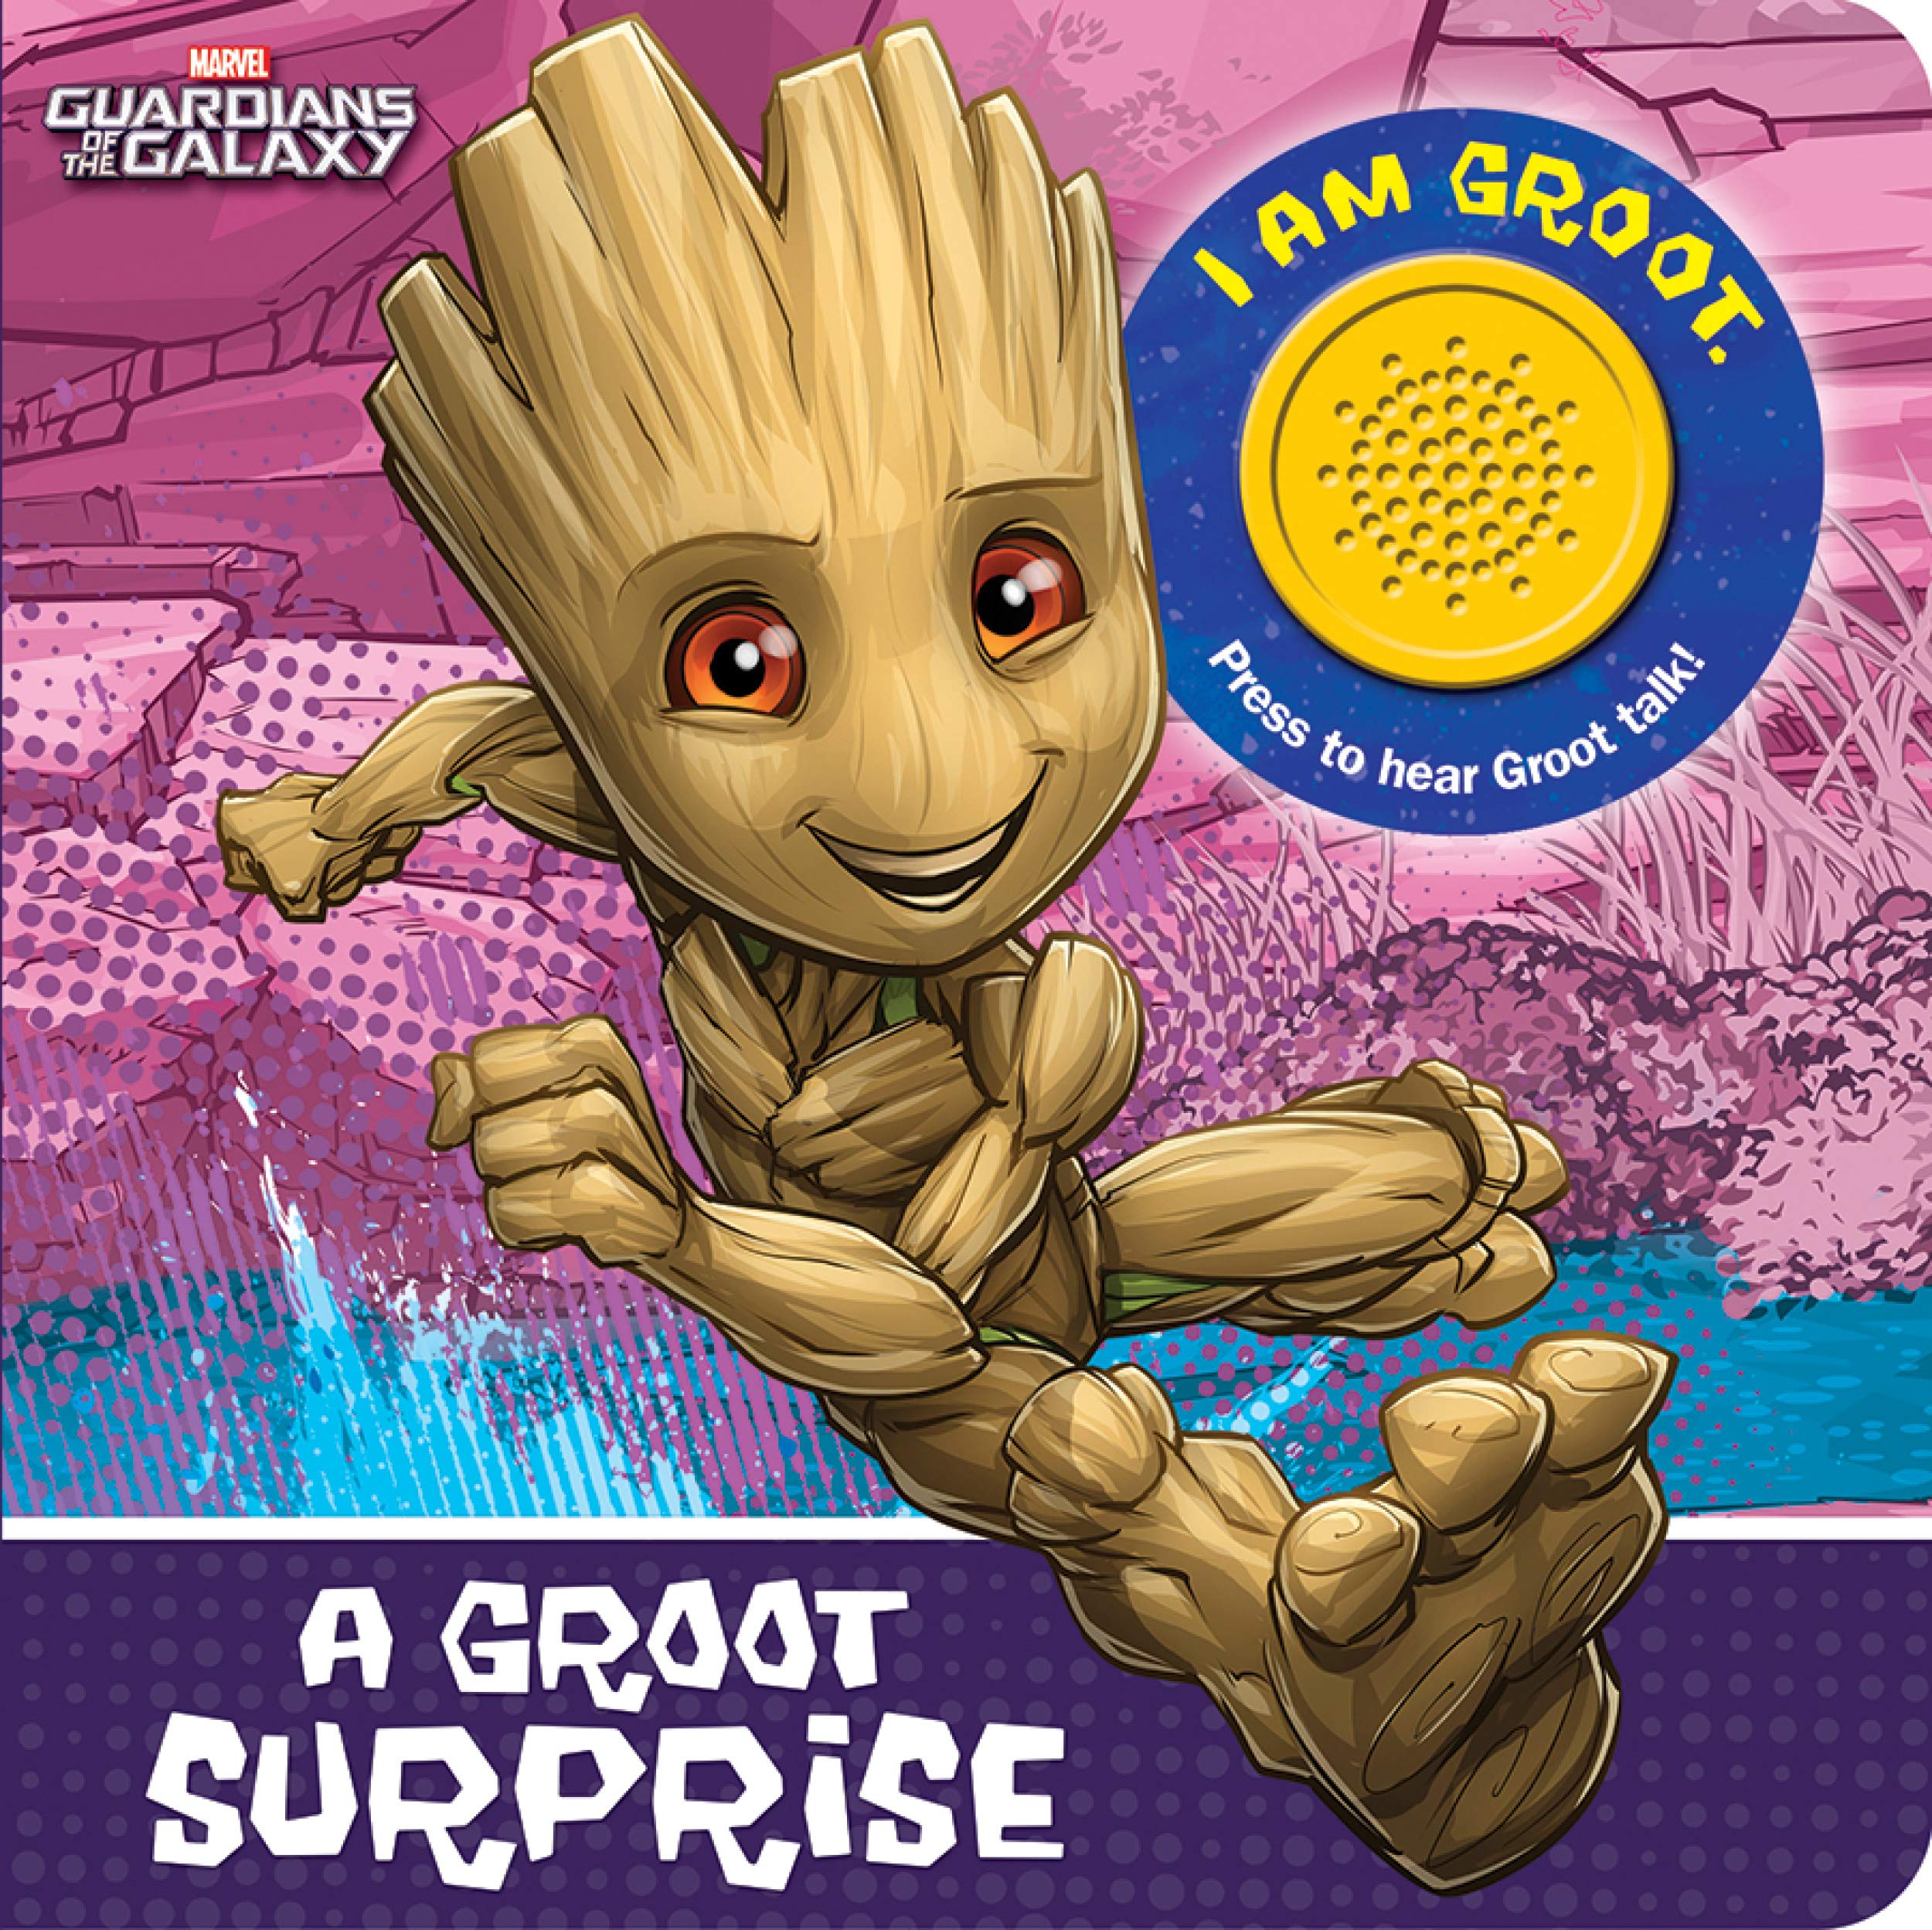 Marvel Guardians of the Galaxy / I Am Groot - A Groot Surprise! Sound Book - PI Kids (Play-A-Sound)